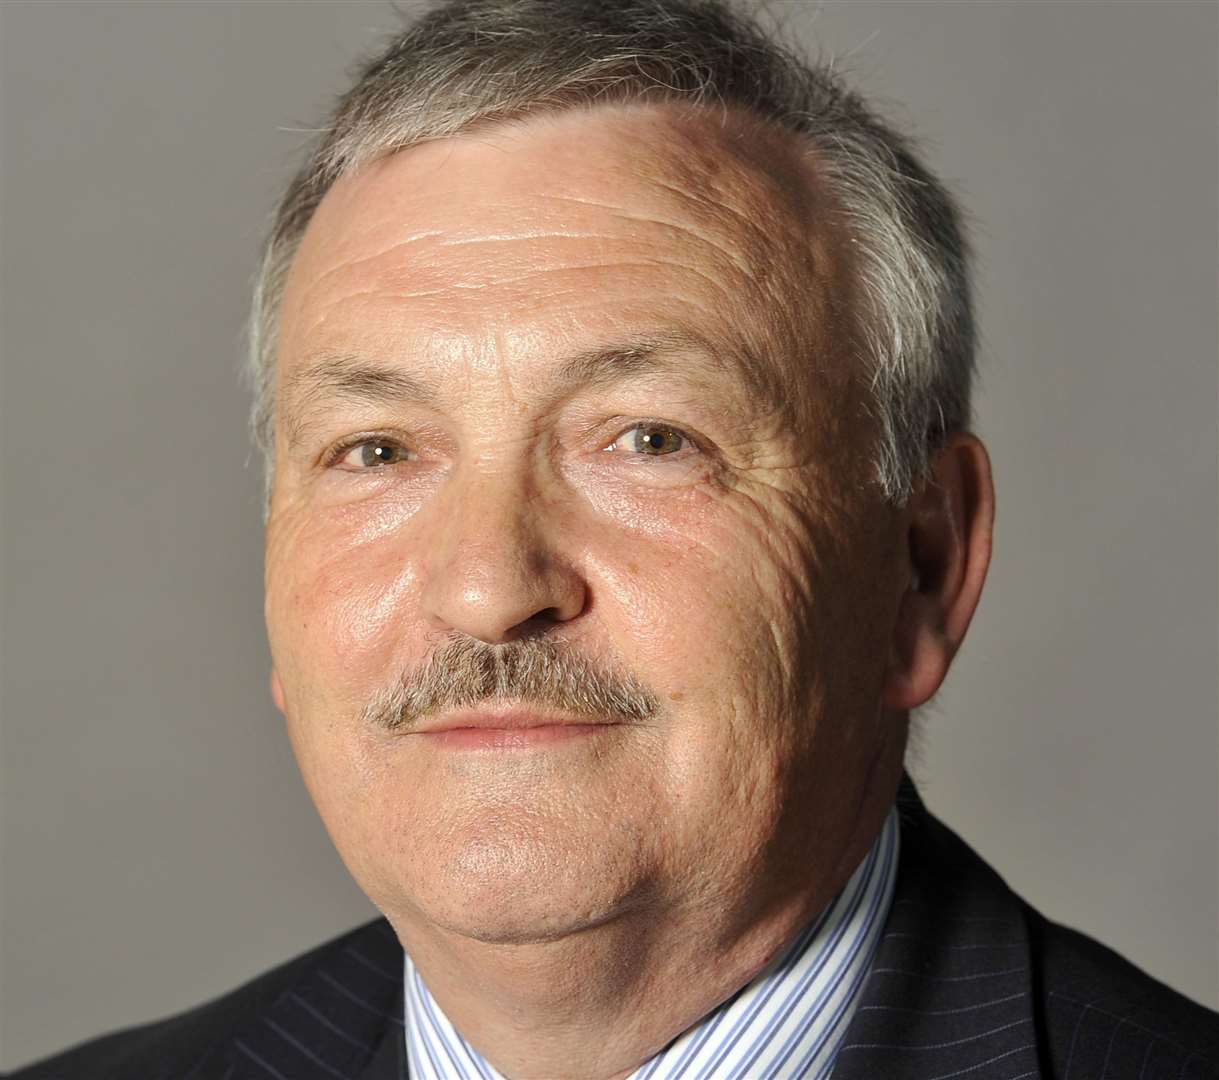 Medway Council leader Alan Jarrett said he was pleased the furlough scheme had been extended